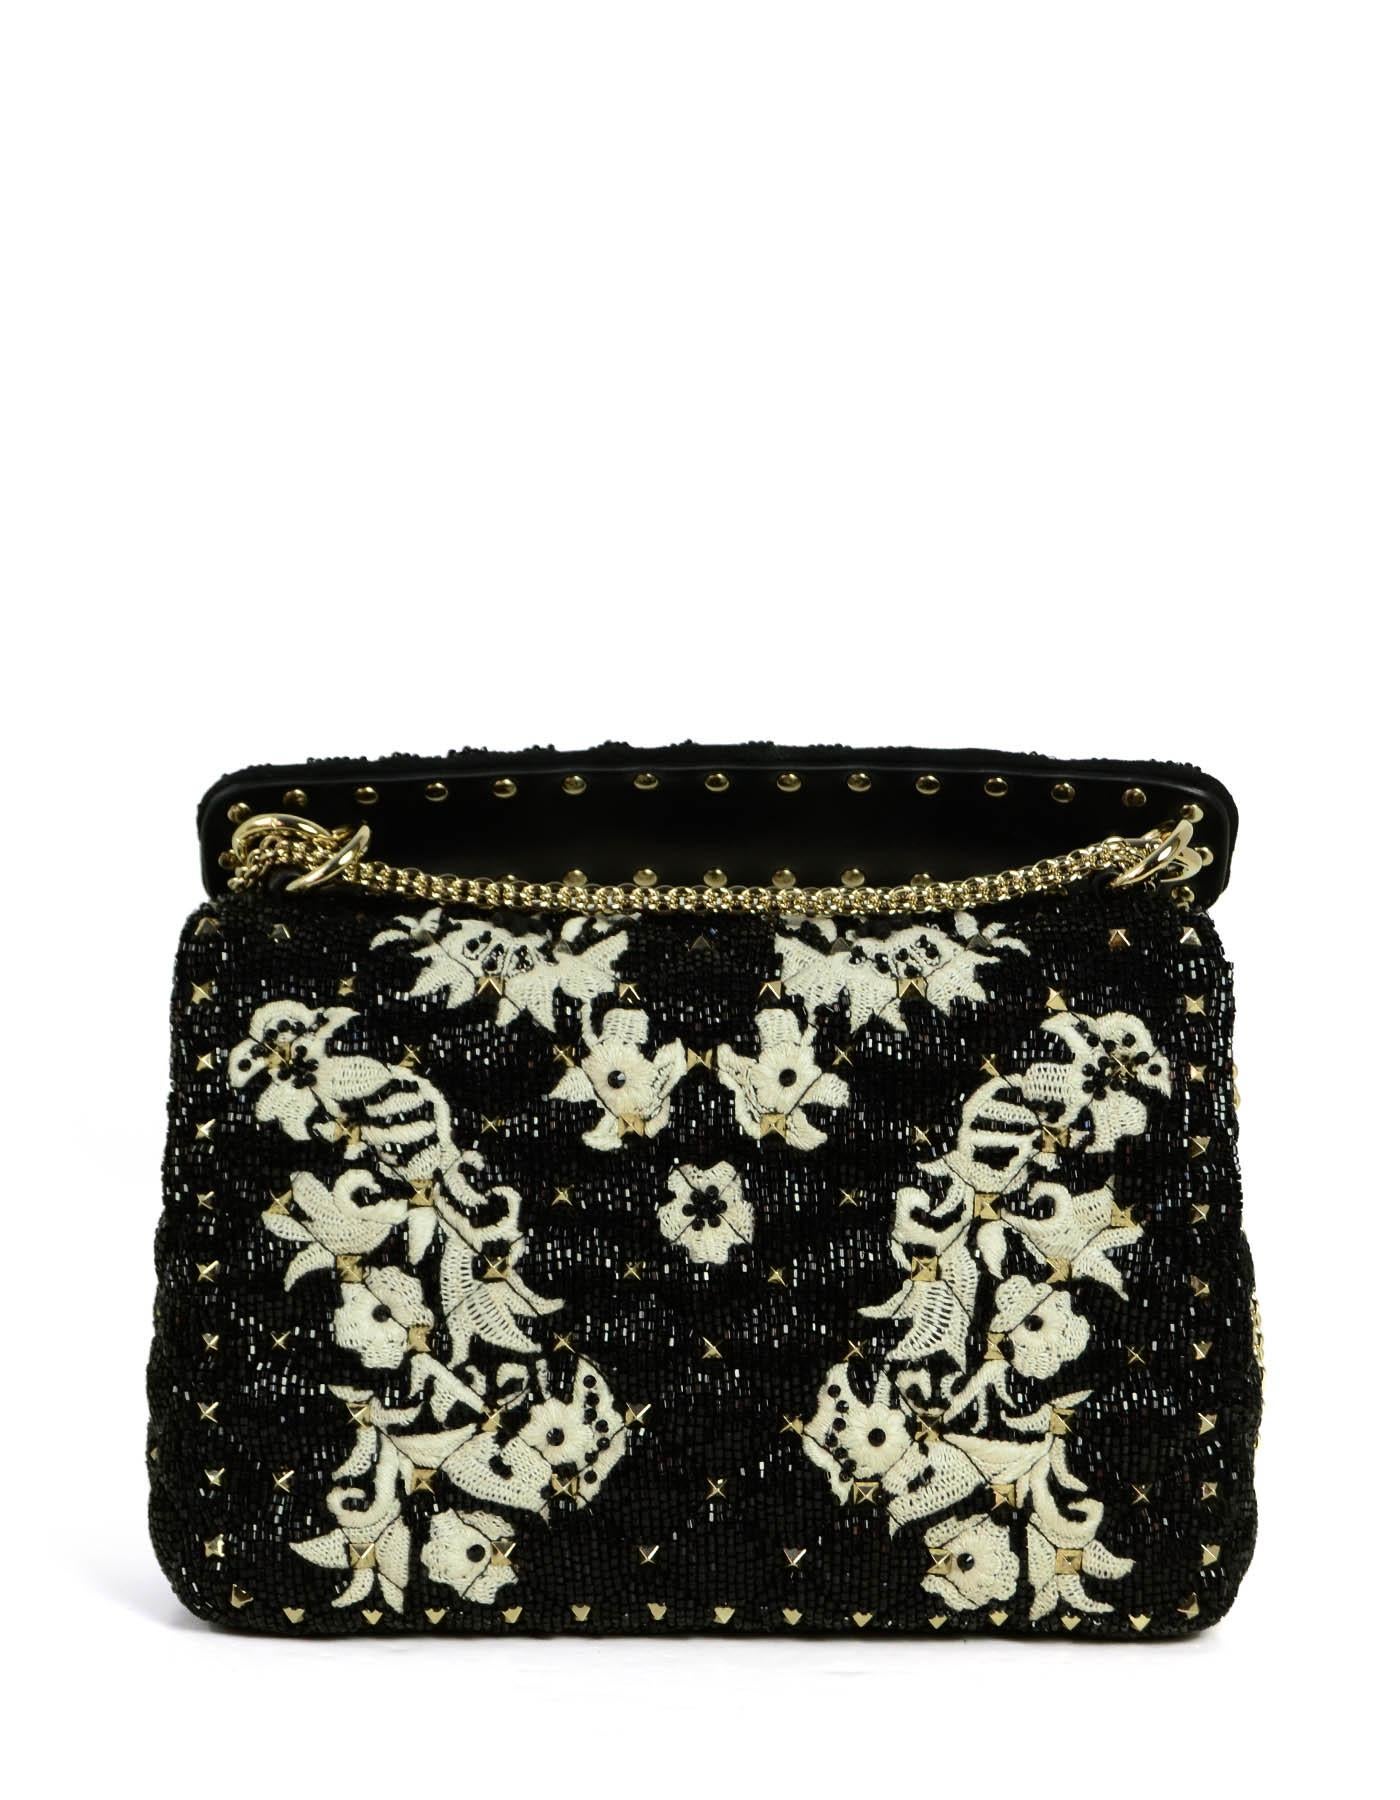 Valentino Black/White Lace & Beaded Medium Rockstud Spike Flap Bag  rt. $4, 895 In Excellent Condition In New York, NY